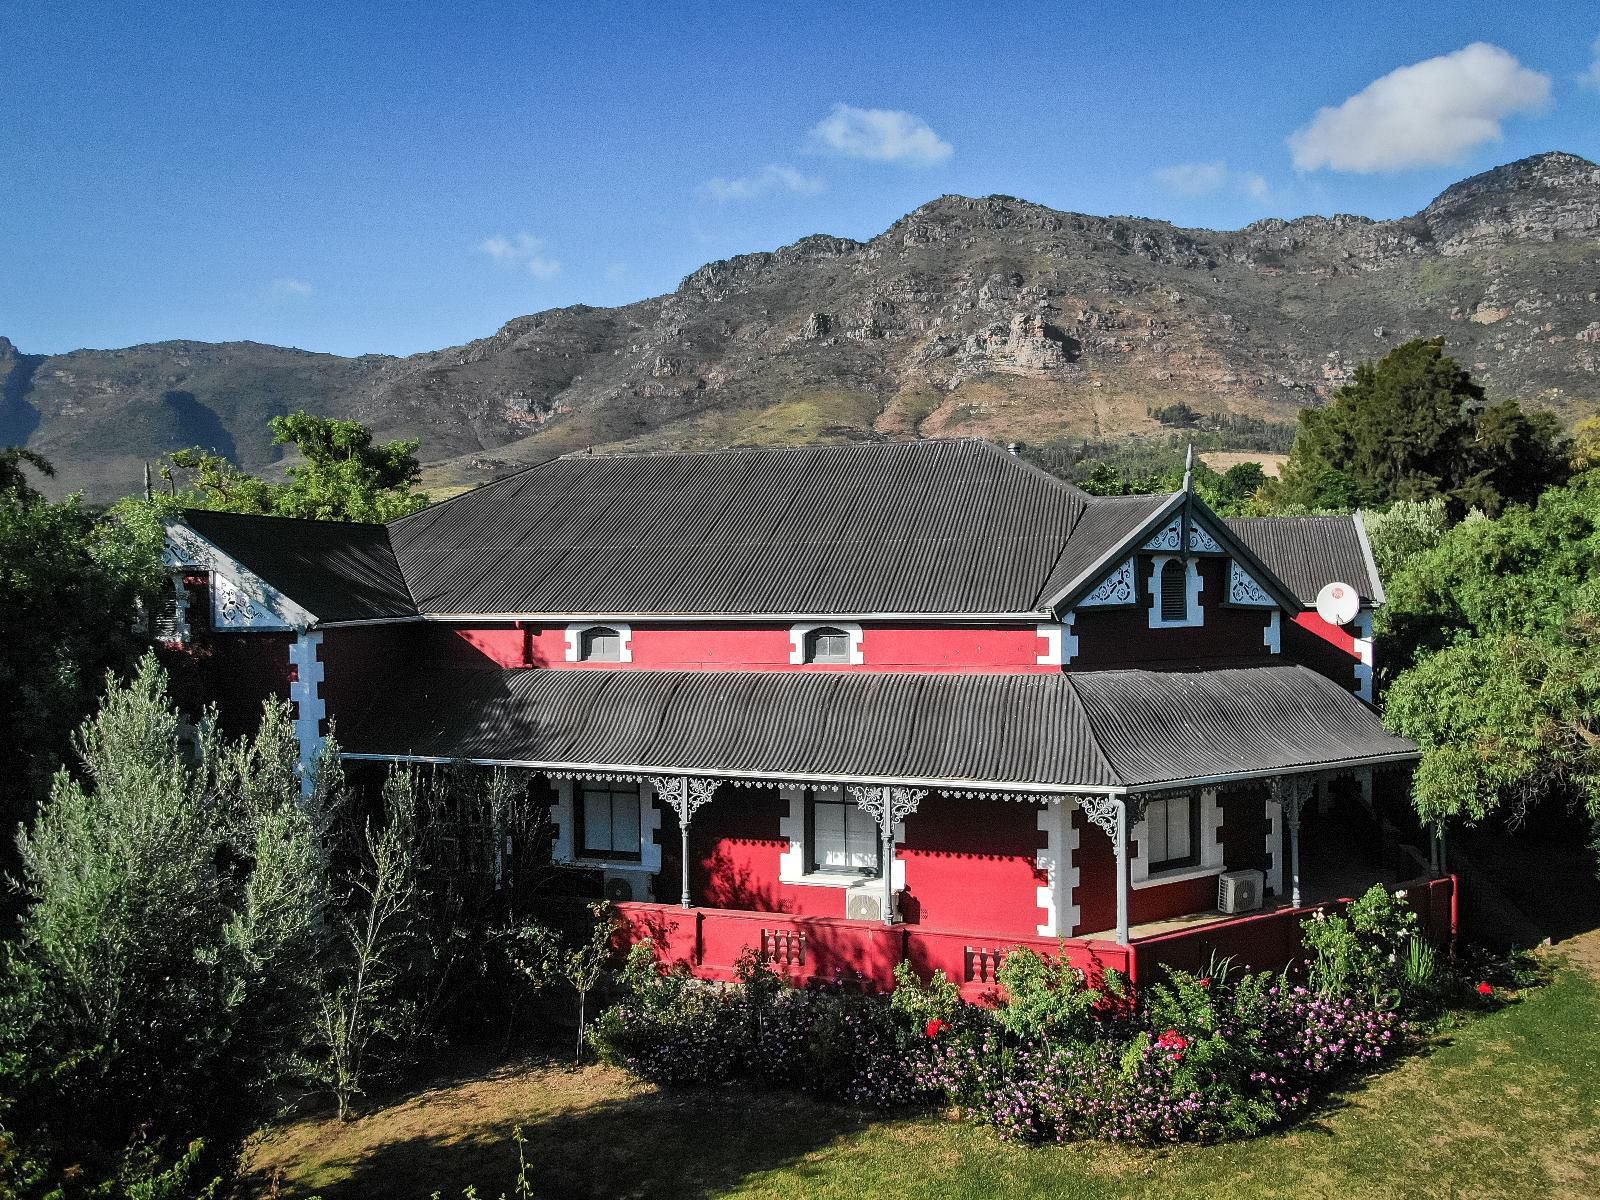 Ruby Rose Countryhouse Riebeek West Western Cape South Africa Building, Architecture, House, Mountain, Nature, Highland